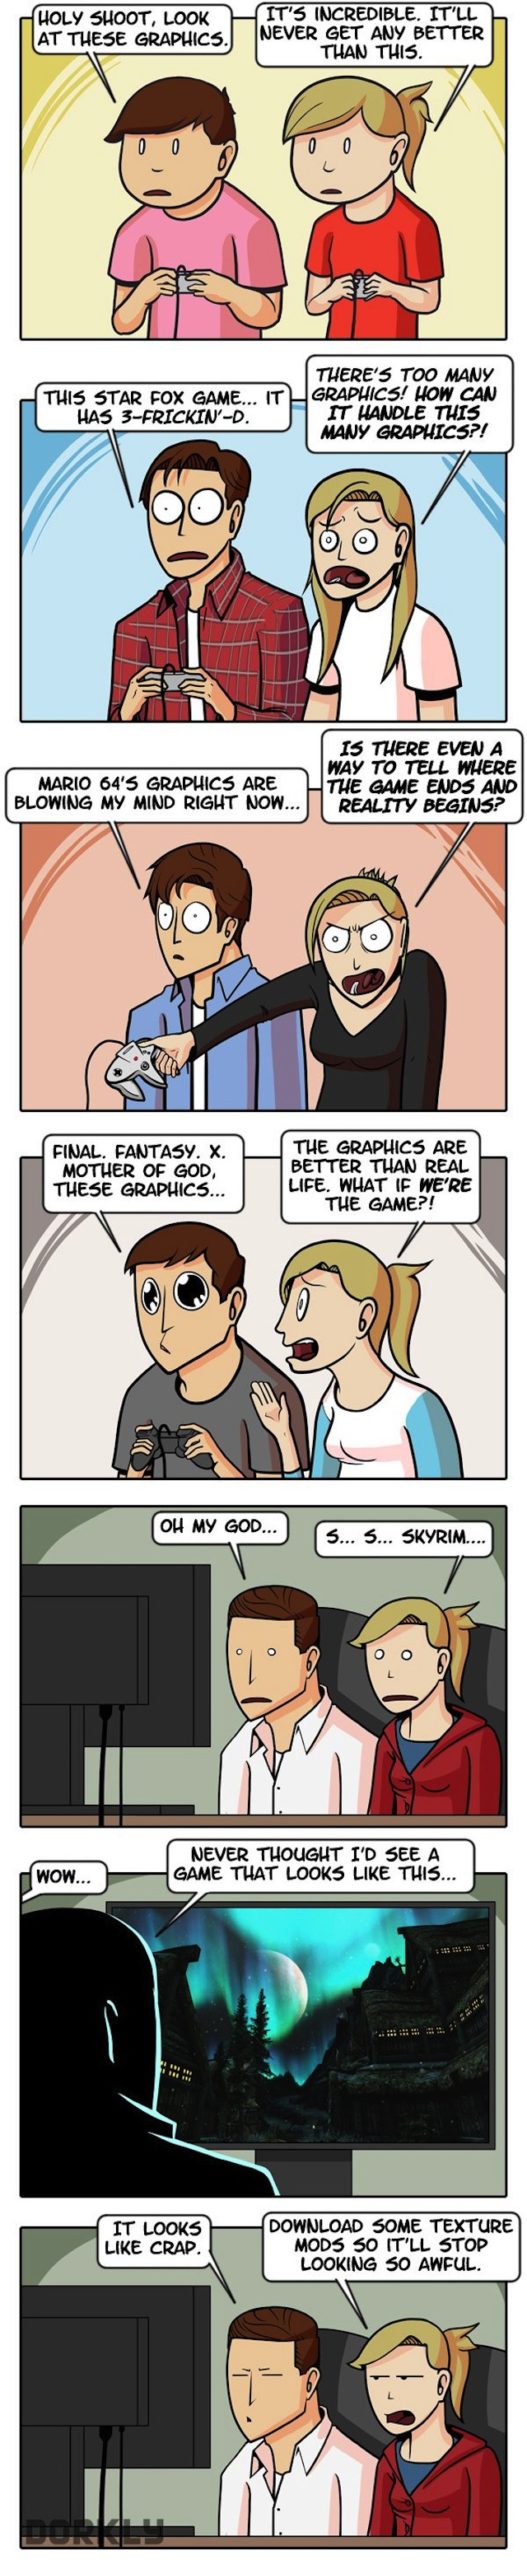 The Totally True History Of Video Game Graphics